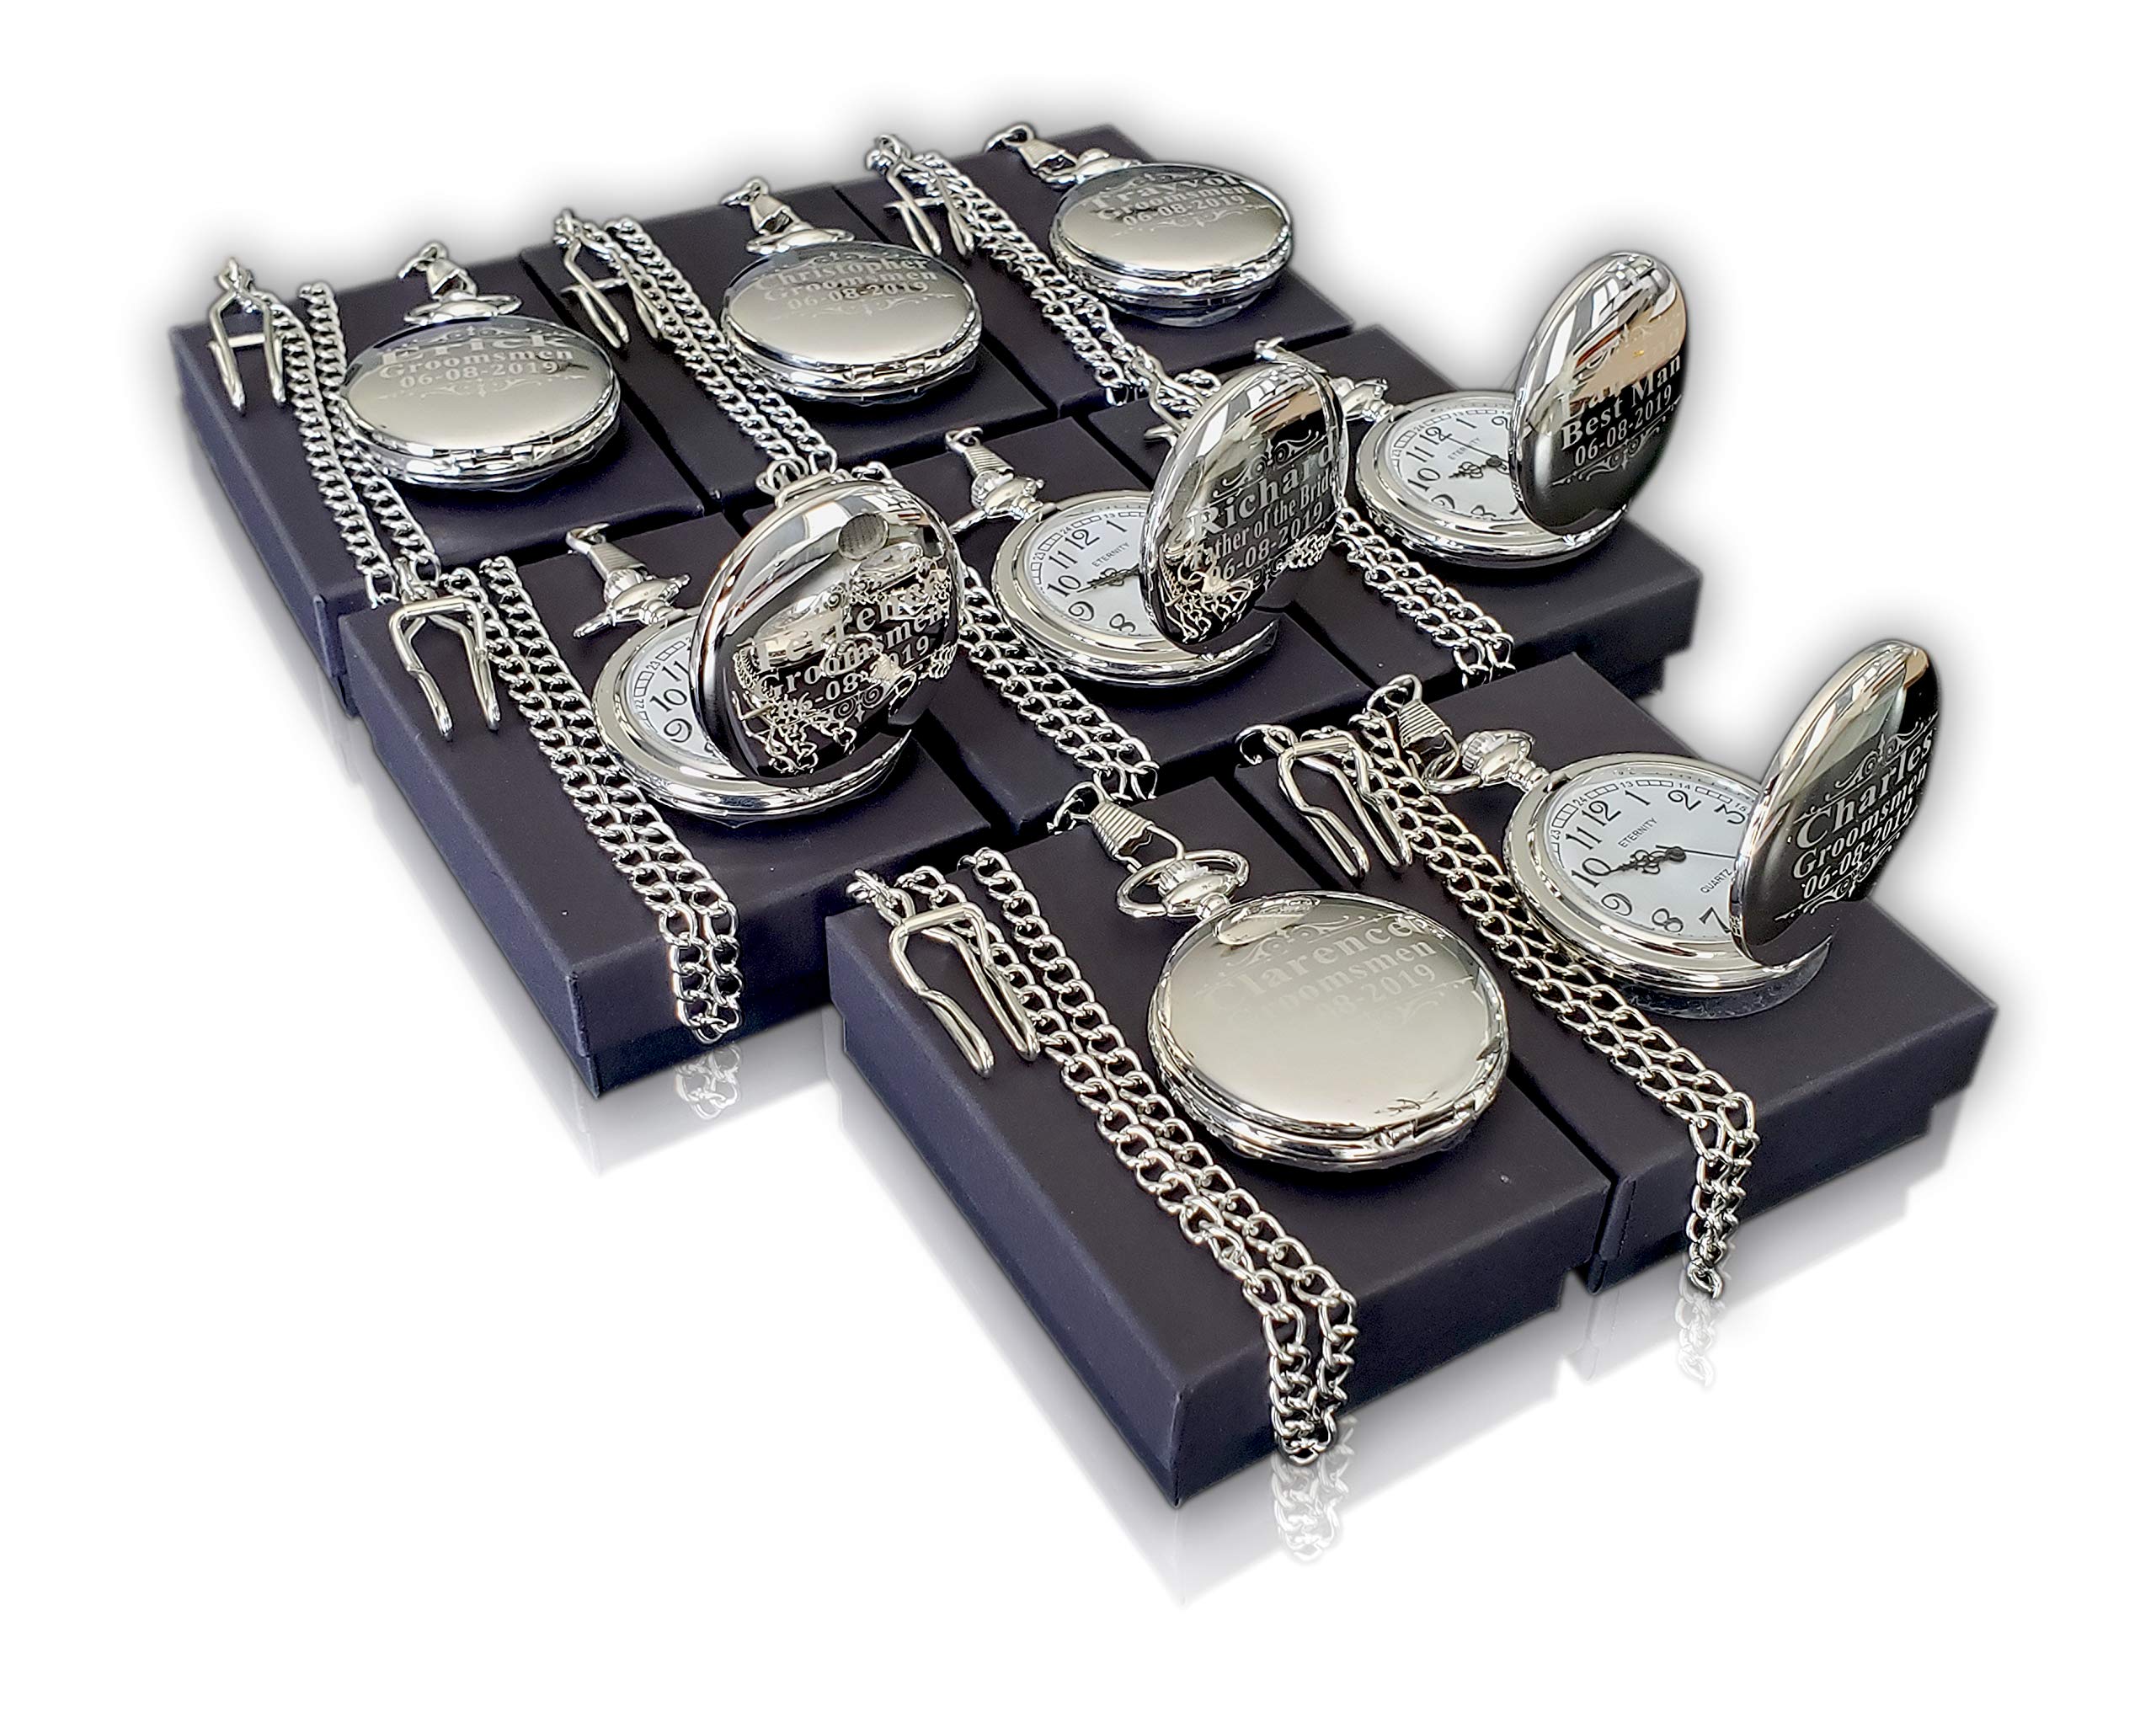 Eternity Engraving inc 8 Engraved Pocket Watches custom Fitted Box Included, Buckle chain, Engraving Included Pocket Wat